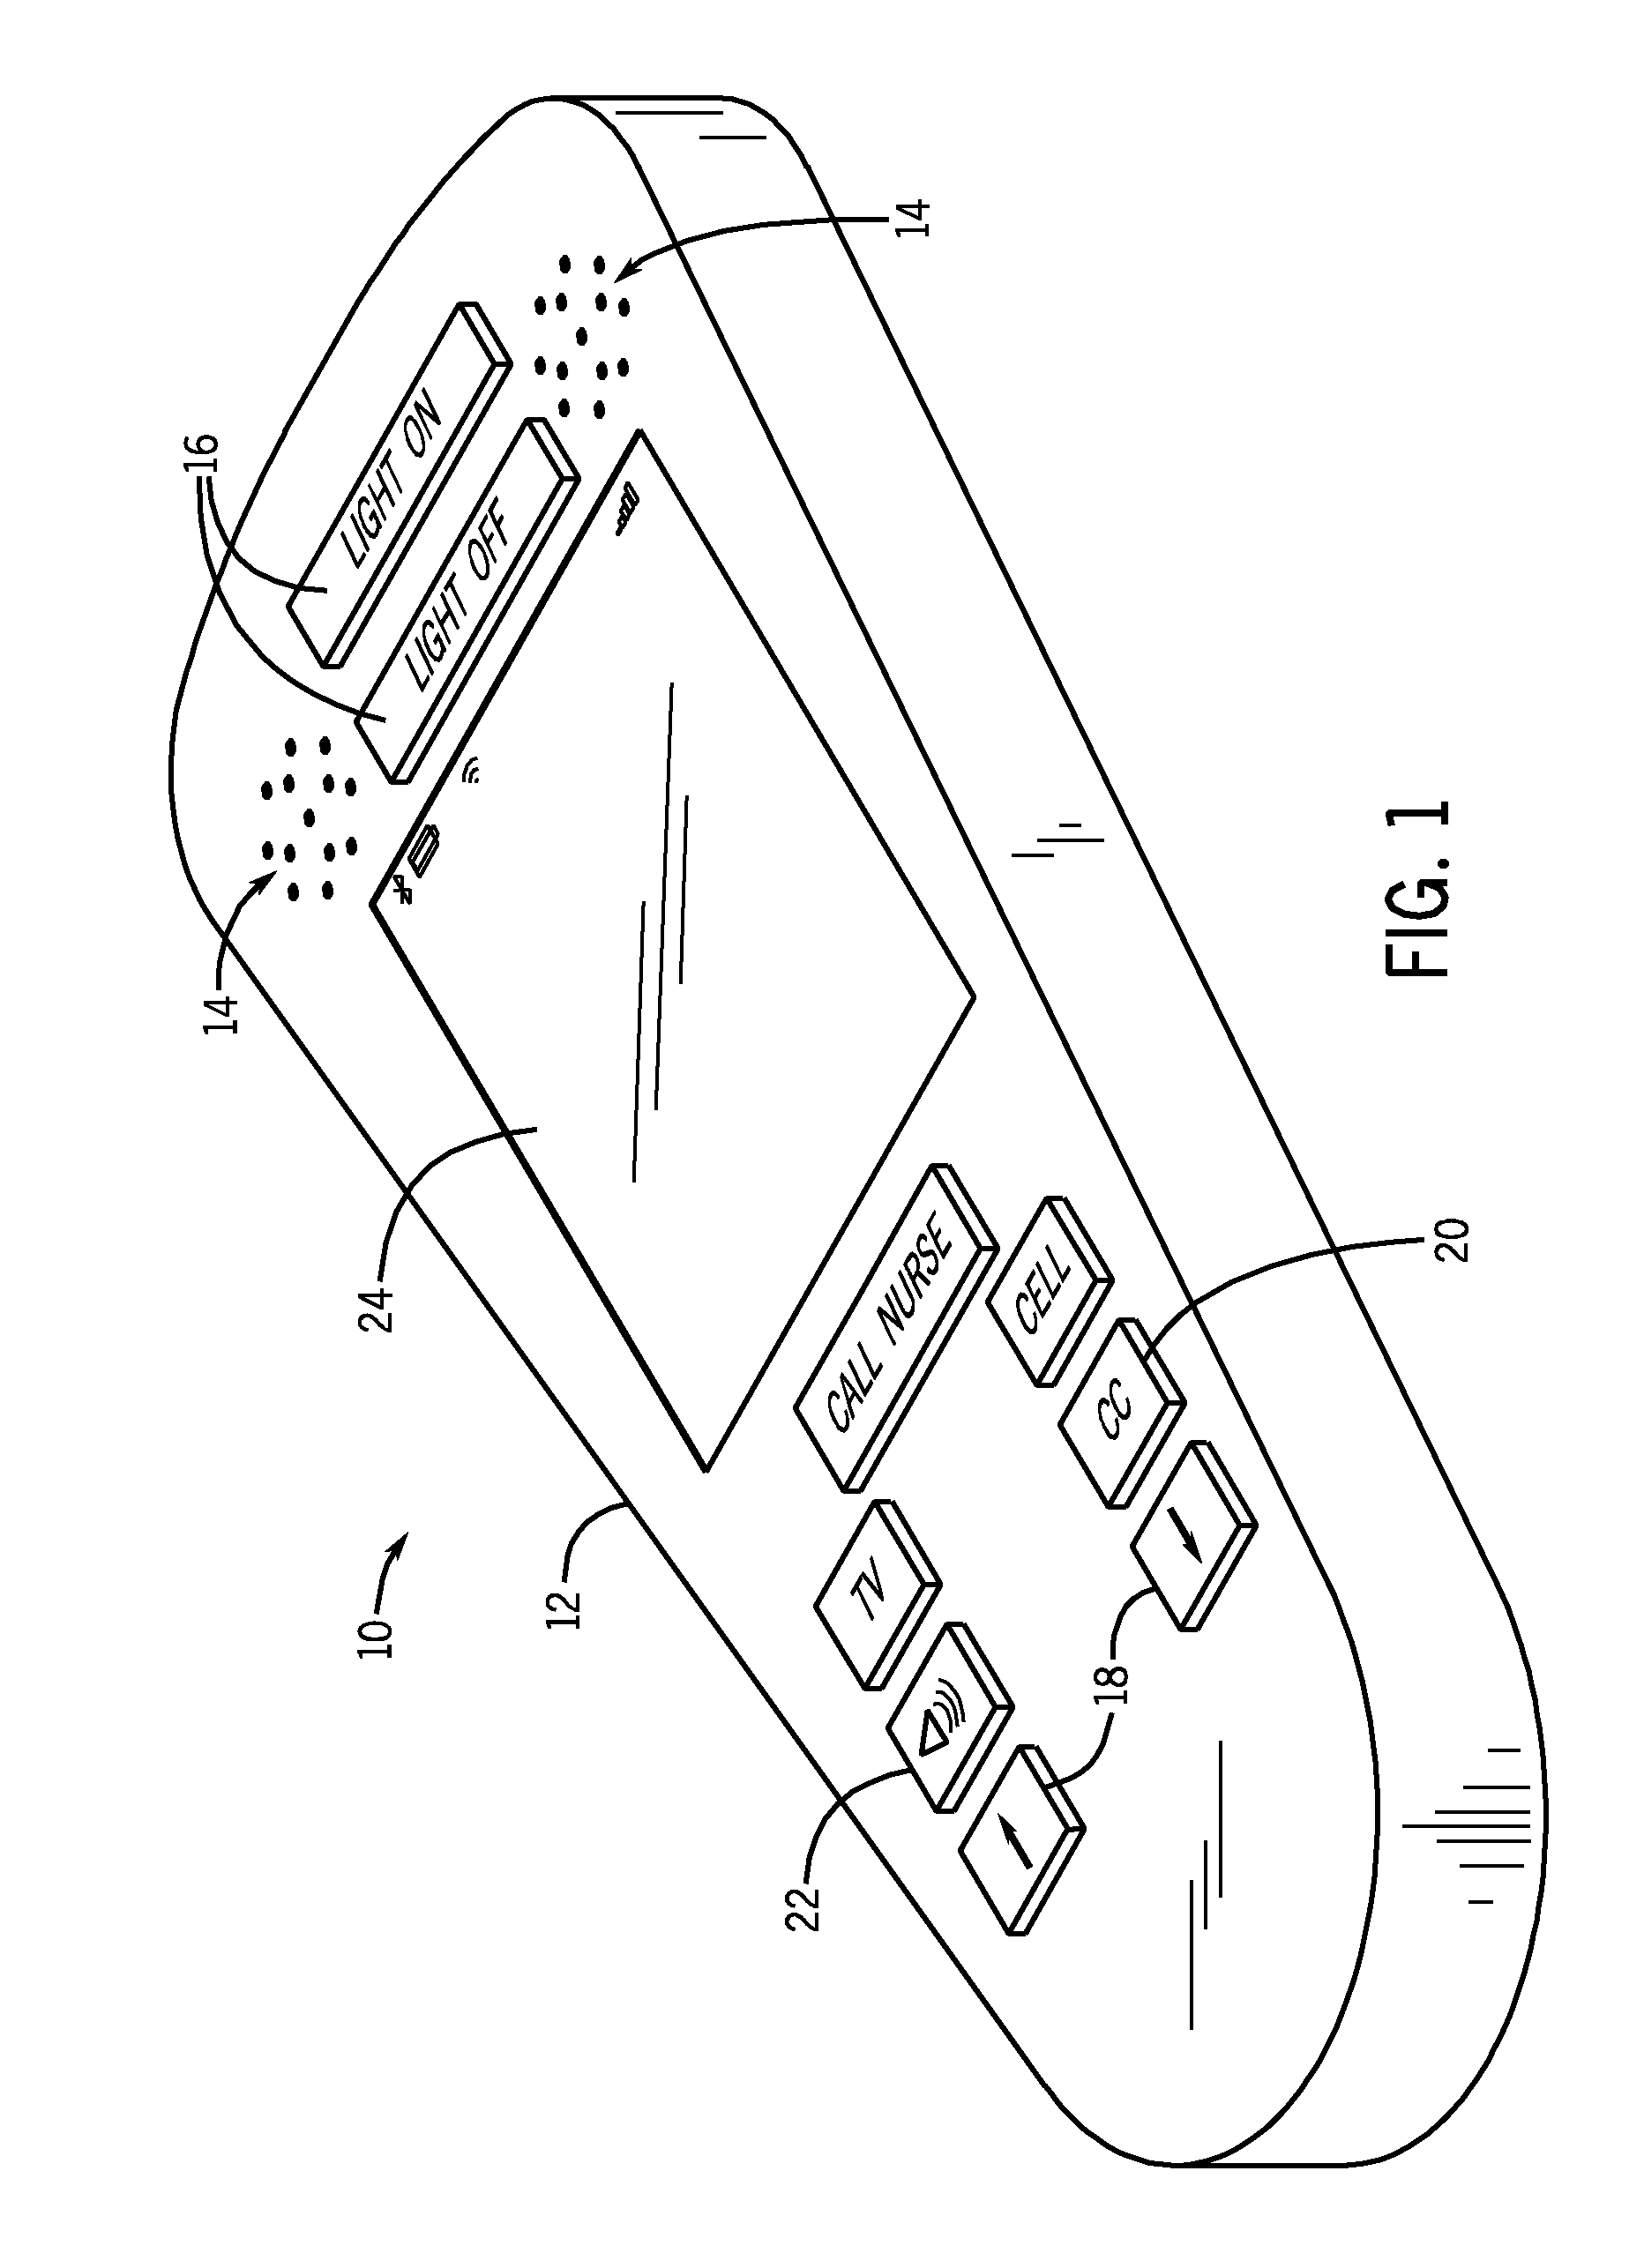 Patient control module with cell and smart phone capabilities